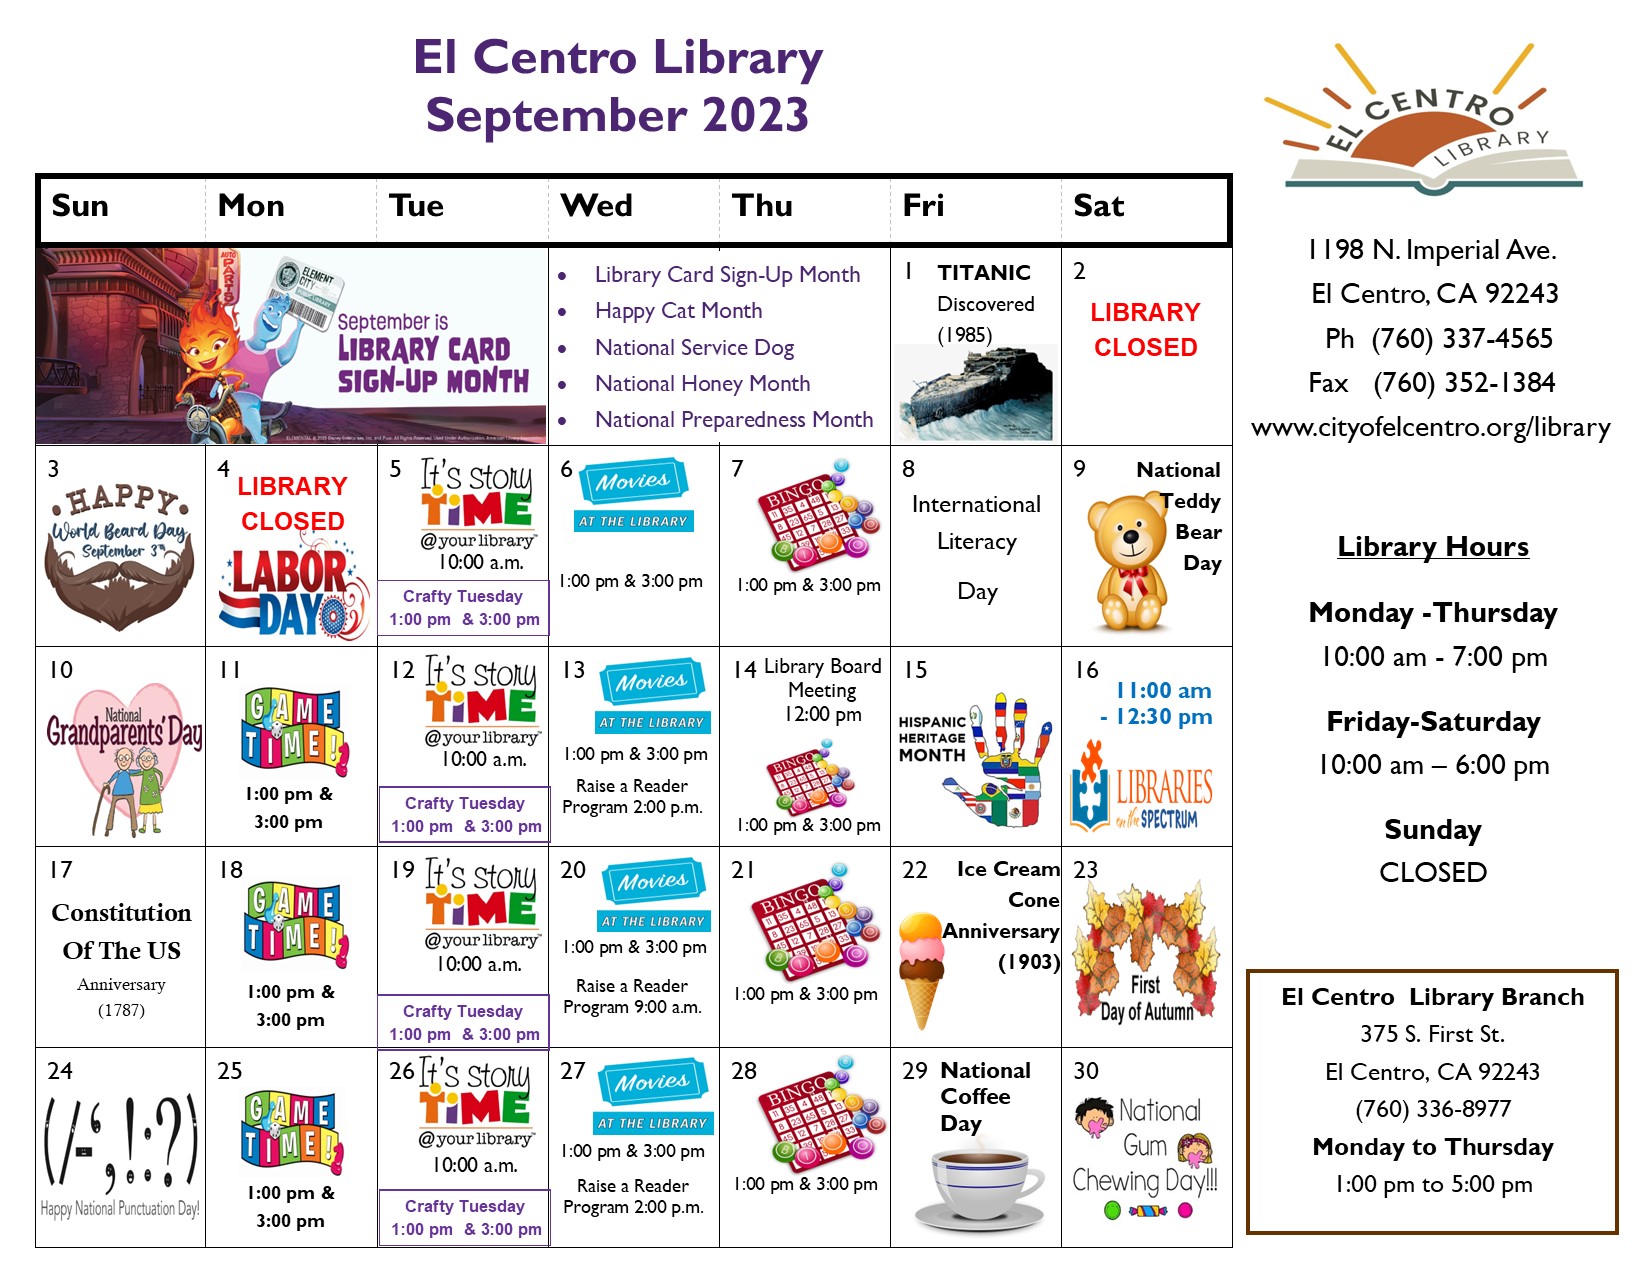 El Centro Library calendar September 2023
El Centro Library 1198 Imperial Ave. El Centro, CA 92243 Phone number 760 337 4565 www.cityofelcentro.org/library
Library hours
Monday-Thursday 10:00 am -7:00 pm
Friday and Saturday 10:00 am to 7:00 pm Sunday closed
El Centro library Branch 375 S. First St. El Centro, CA 92243
760 336 8977 Monday to Thursday 1:00 pm to 5:00 pm
September is Library Card Sign-up Month
Happy cat month
National service dog month
National honey month
National preparedness month
Saturday 2 and Monday 4 library closed Game time Mondays 1:00 pm and 3 pm.
Story time programs Tuesdays 10:00 am. Movies at the library Wednesdays at 1:00 pm and 3:00 pm
Bingo Thursdays at 1:00 pm and 3:00 pm.
 